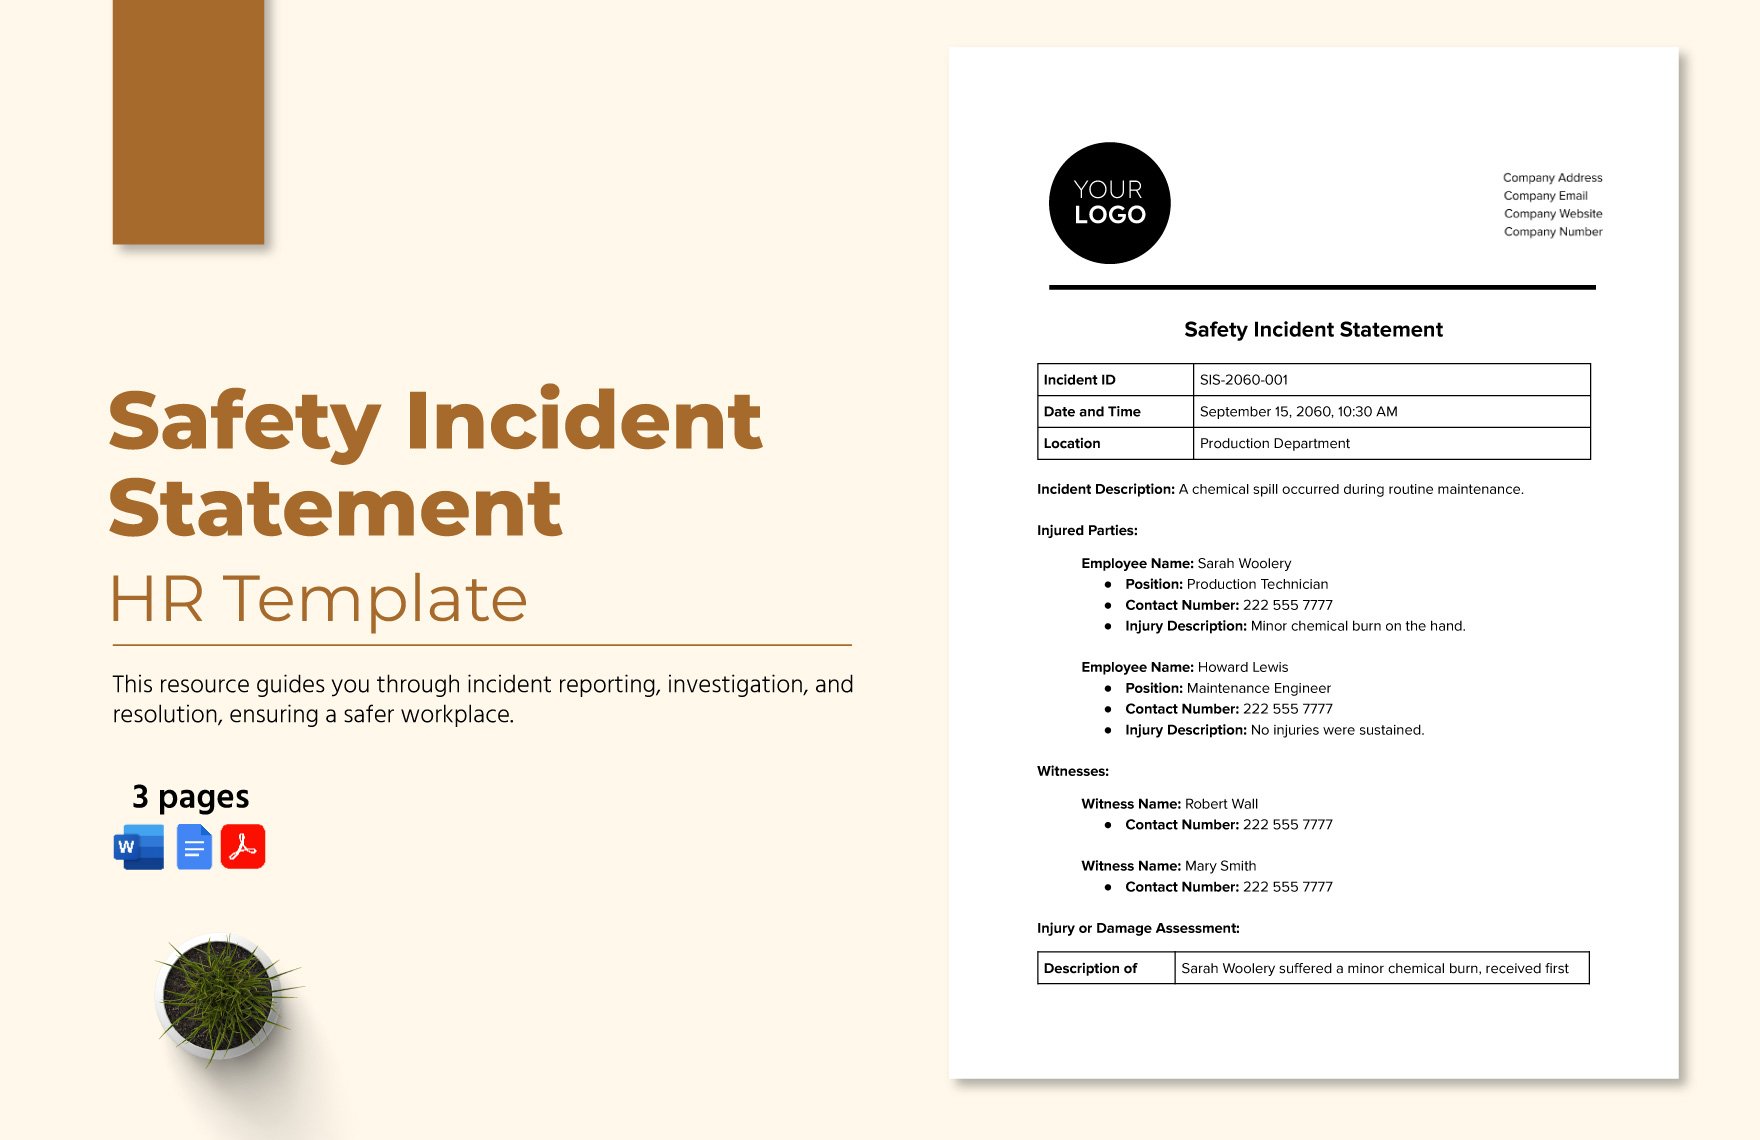 Safety Incident Statement HR Template in Word, Google Docs, PDF